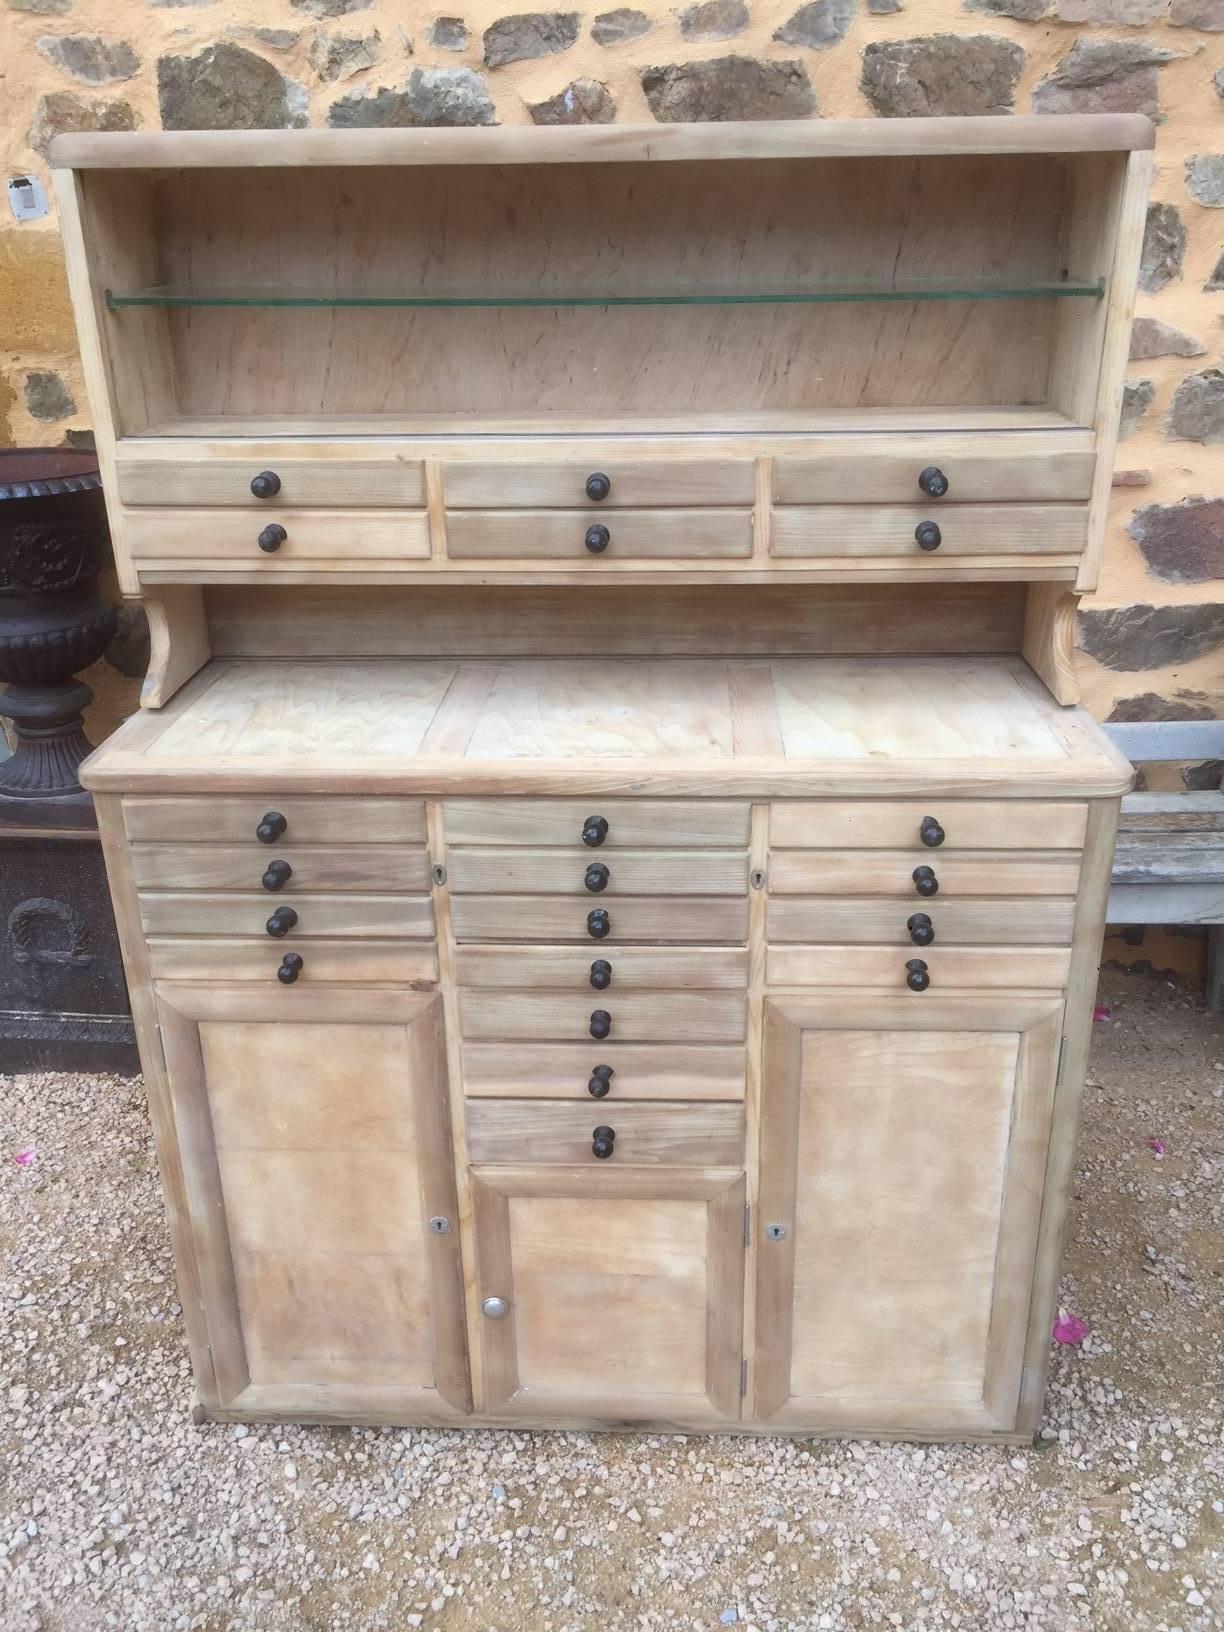 French pickled dentist cabinet with lots of drawers. Glass shelf.
Two parts. The top is removable. To finish restoring.